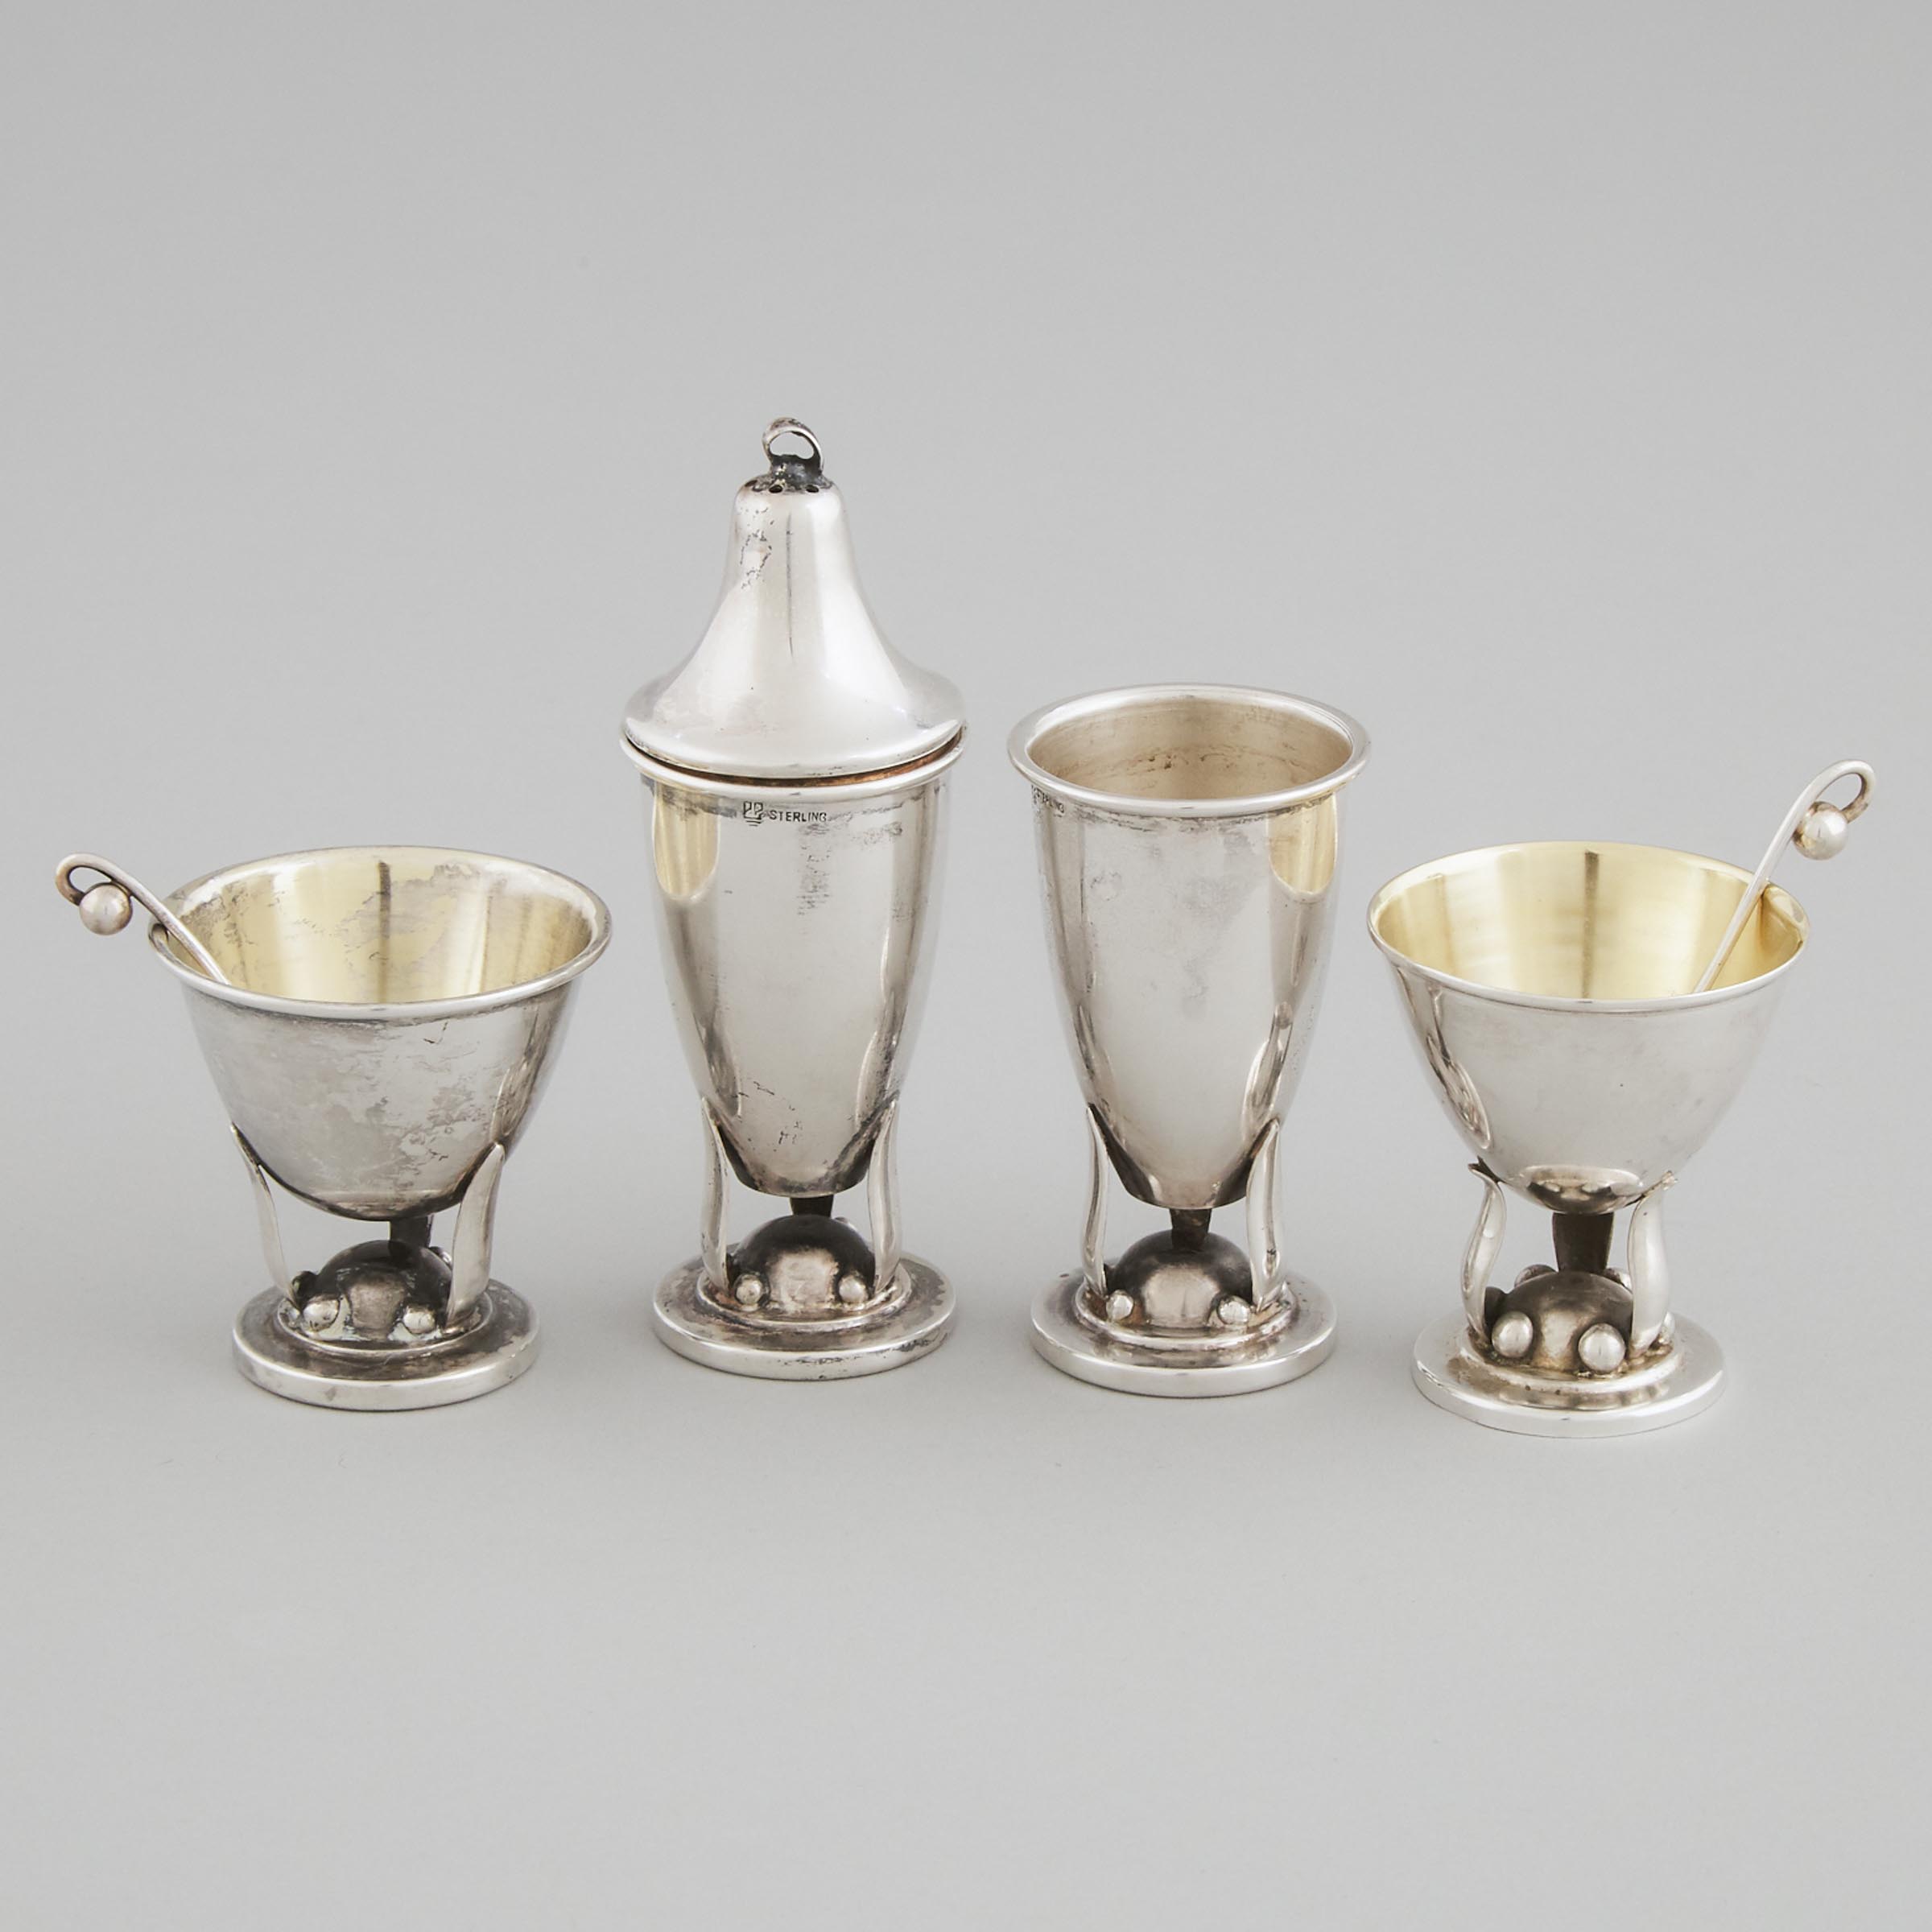 Pair of Canadian Silver Salt Cellars with Spoons and a Pair of Pepper Casters, Poul Petersen, Montreal, Que., mid-20th century